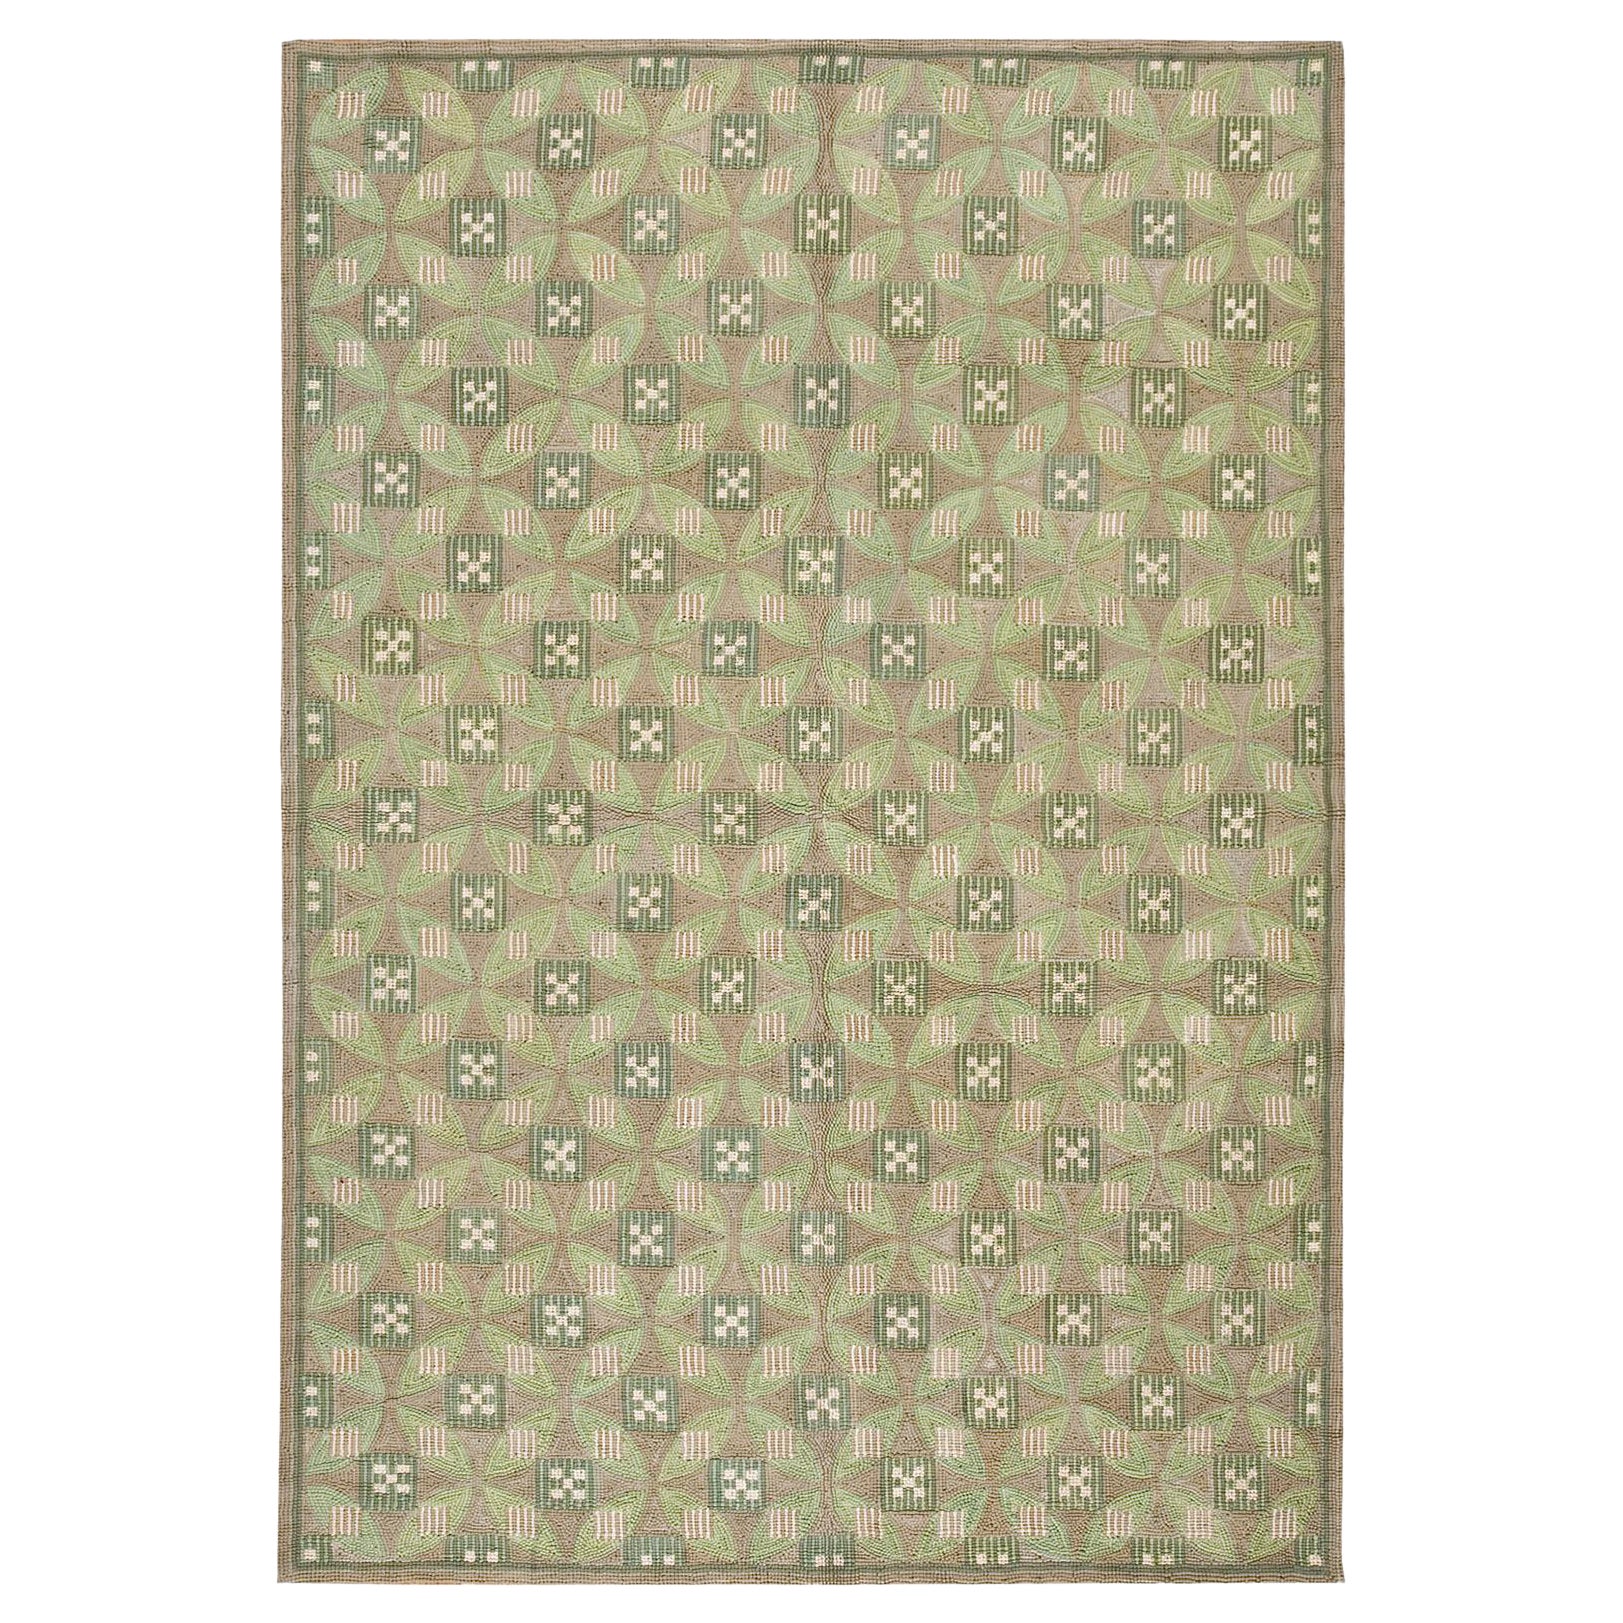 Contemporary Handmade Hooked Rug ( 6' x 9' - 183 x 274 cm ) For Sale